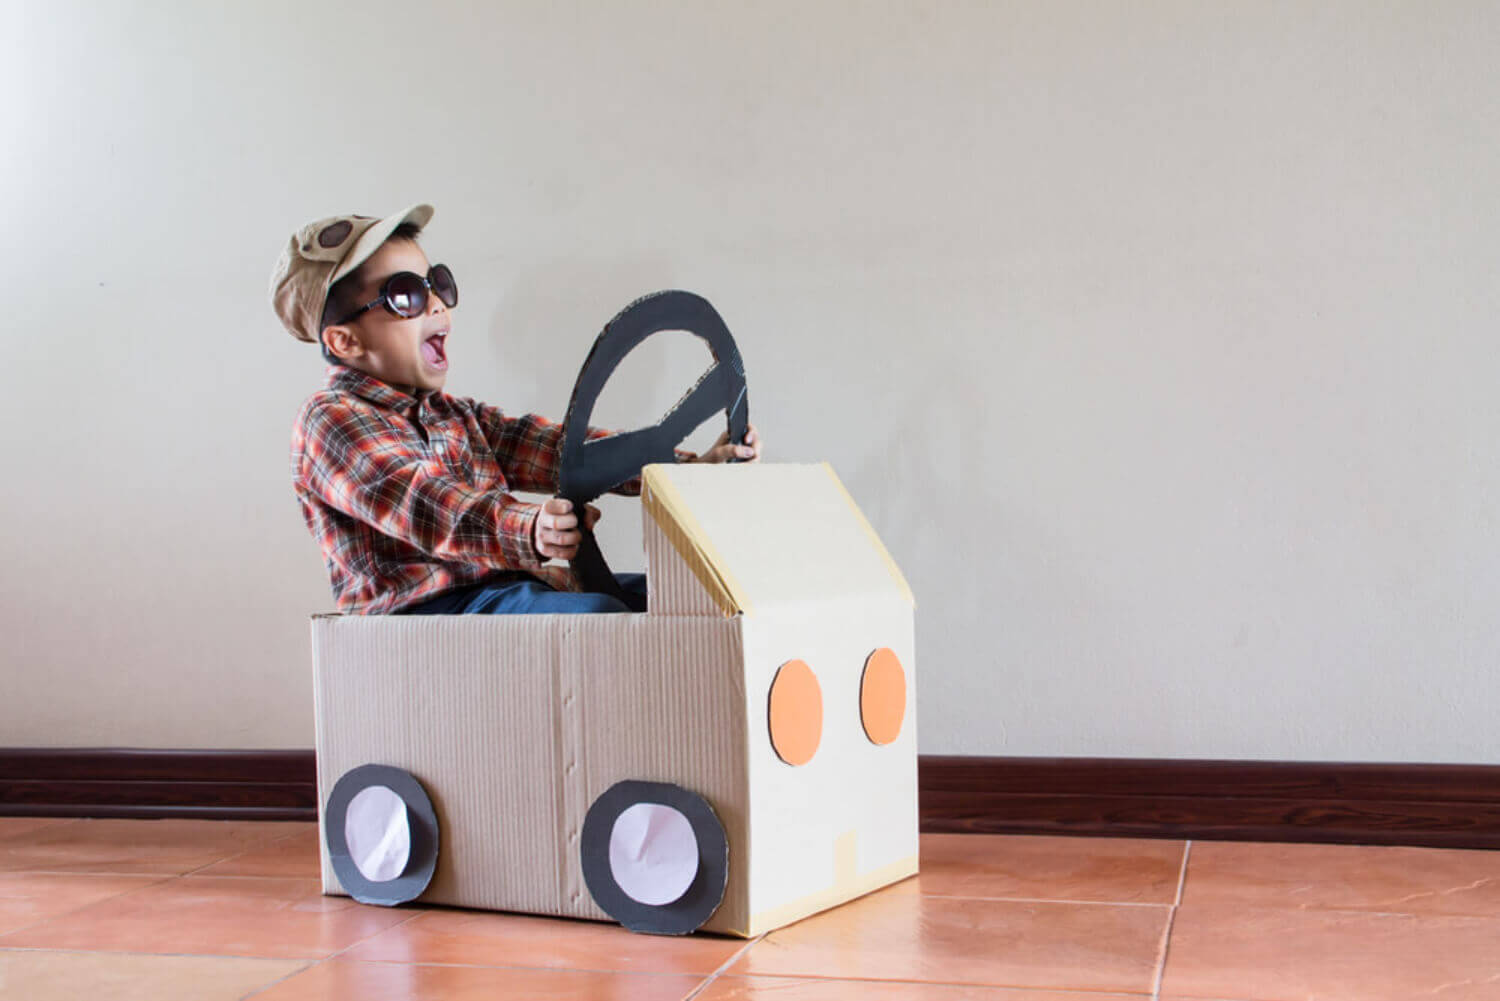 Child playing with a cardboard car, one of the types of play during development.